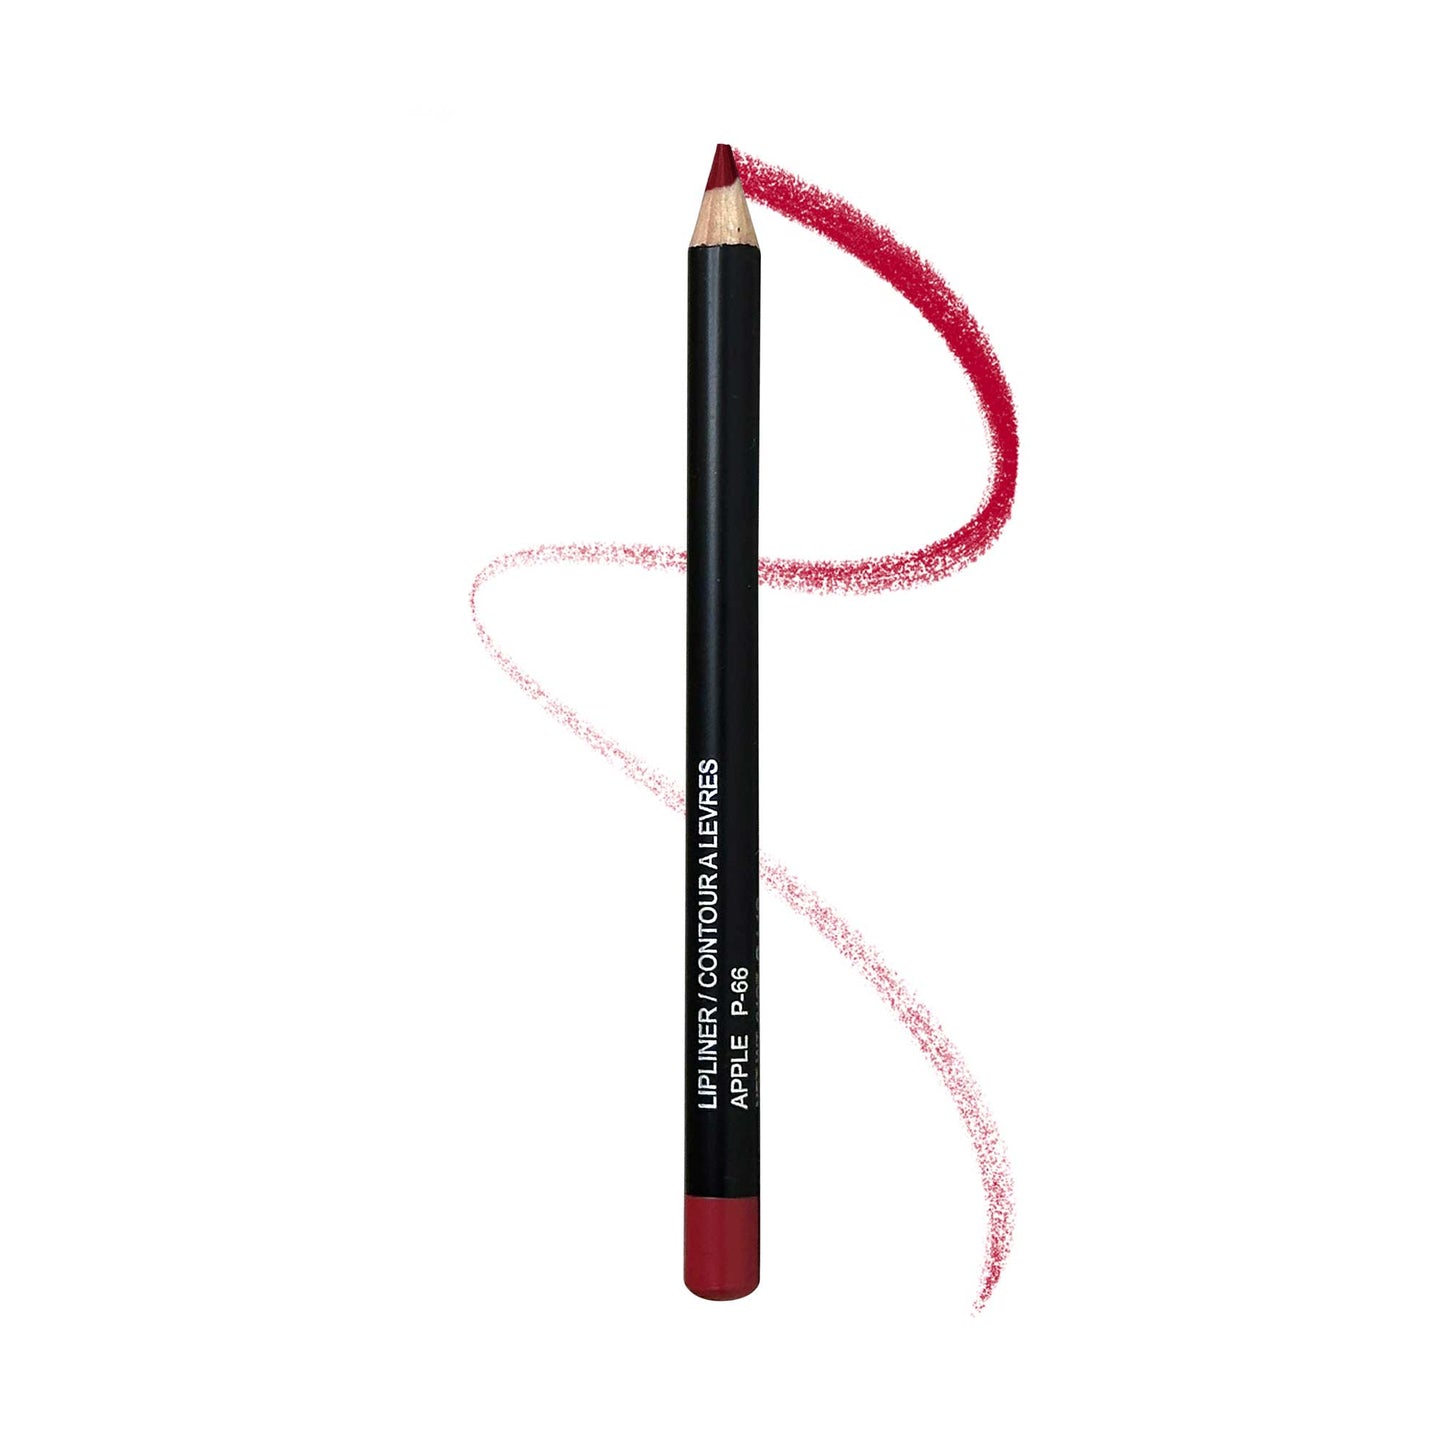 Discover the perfect lip liner with Apple Lip Liner from Cruisin Organics. Crafted with premium ingredients, this product offers exceptional color and precision for a lasting, impeccable look.